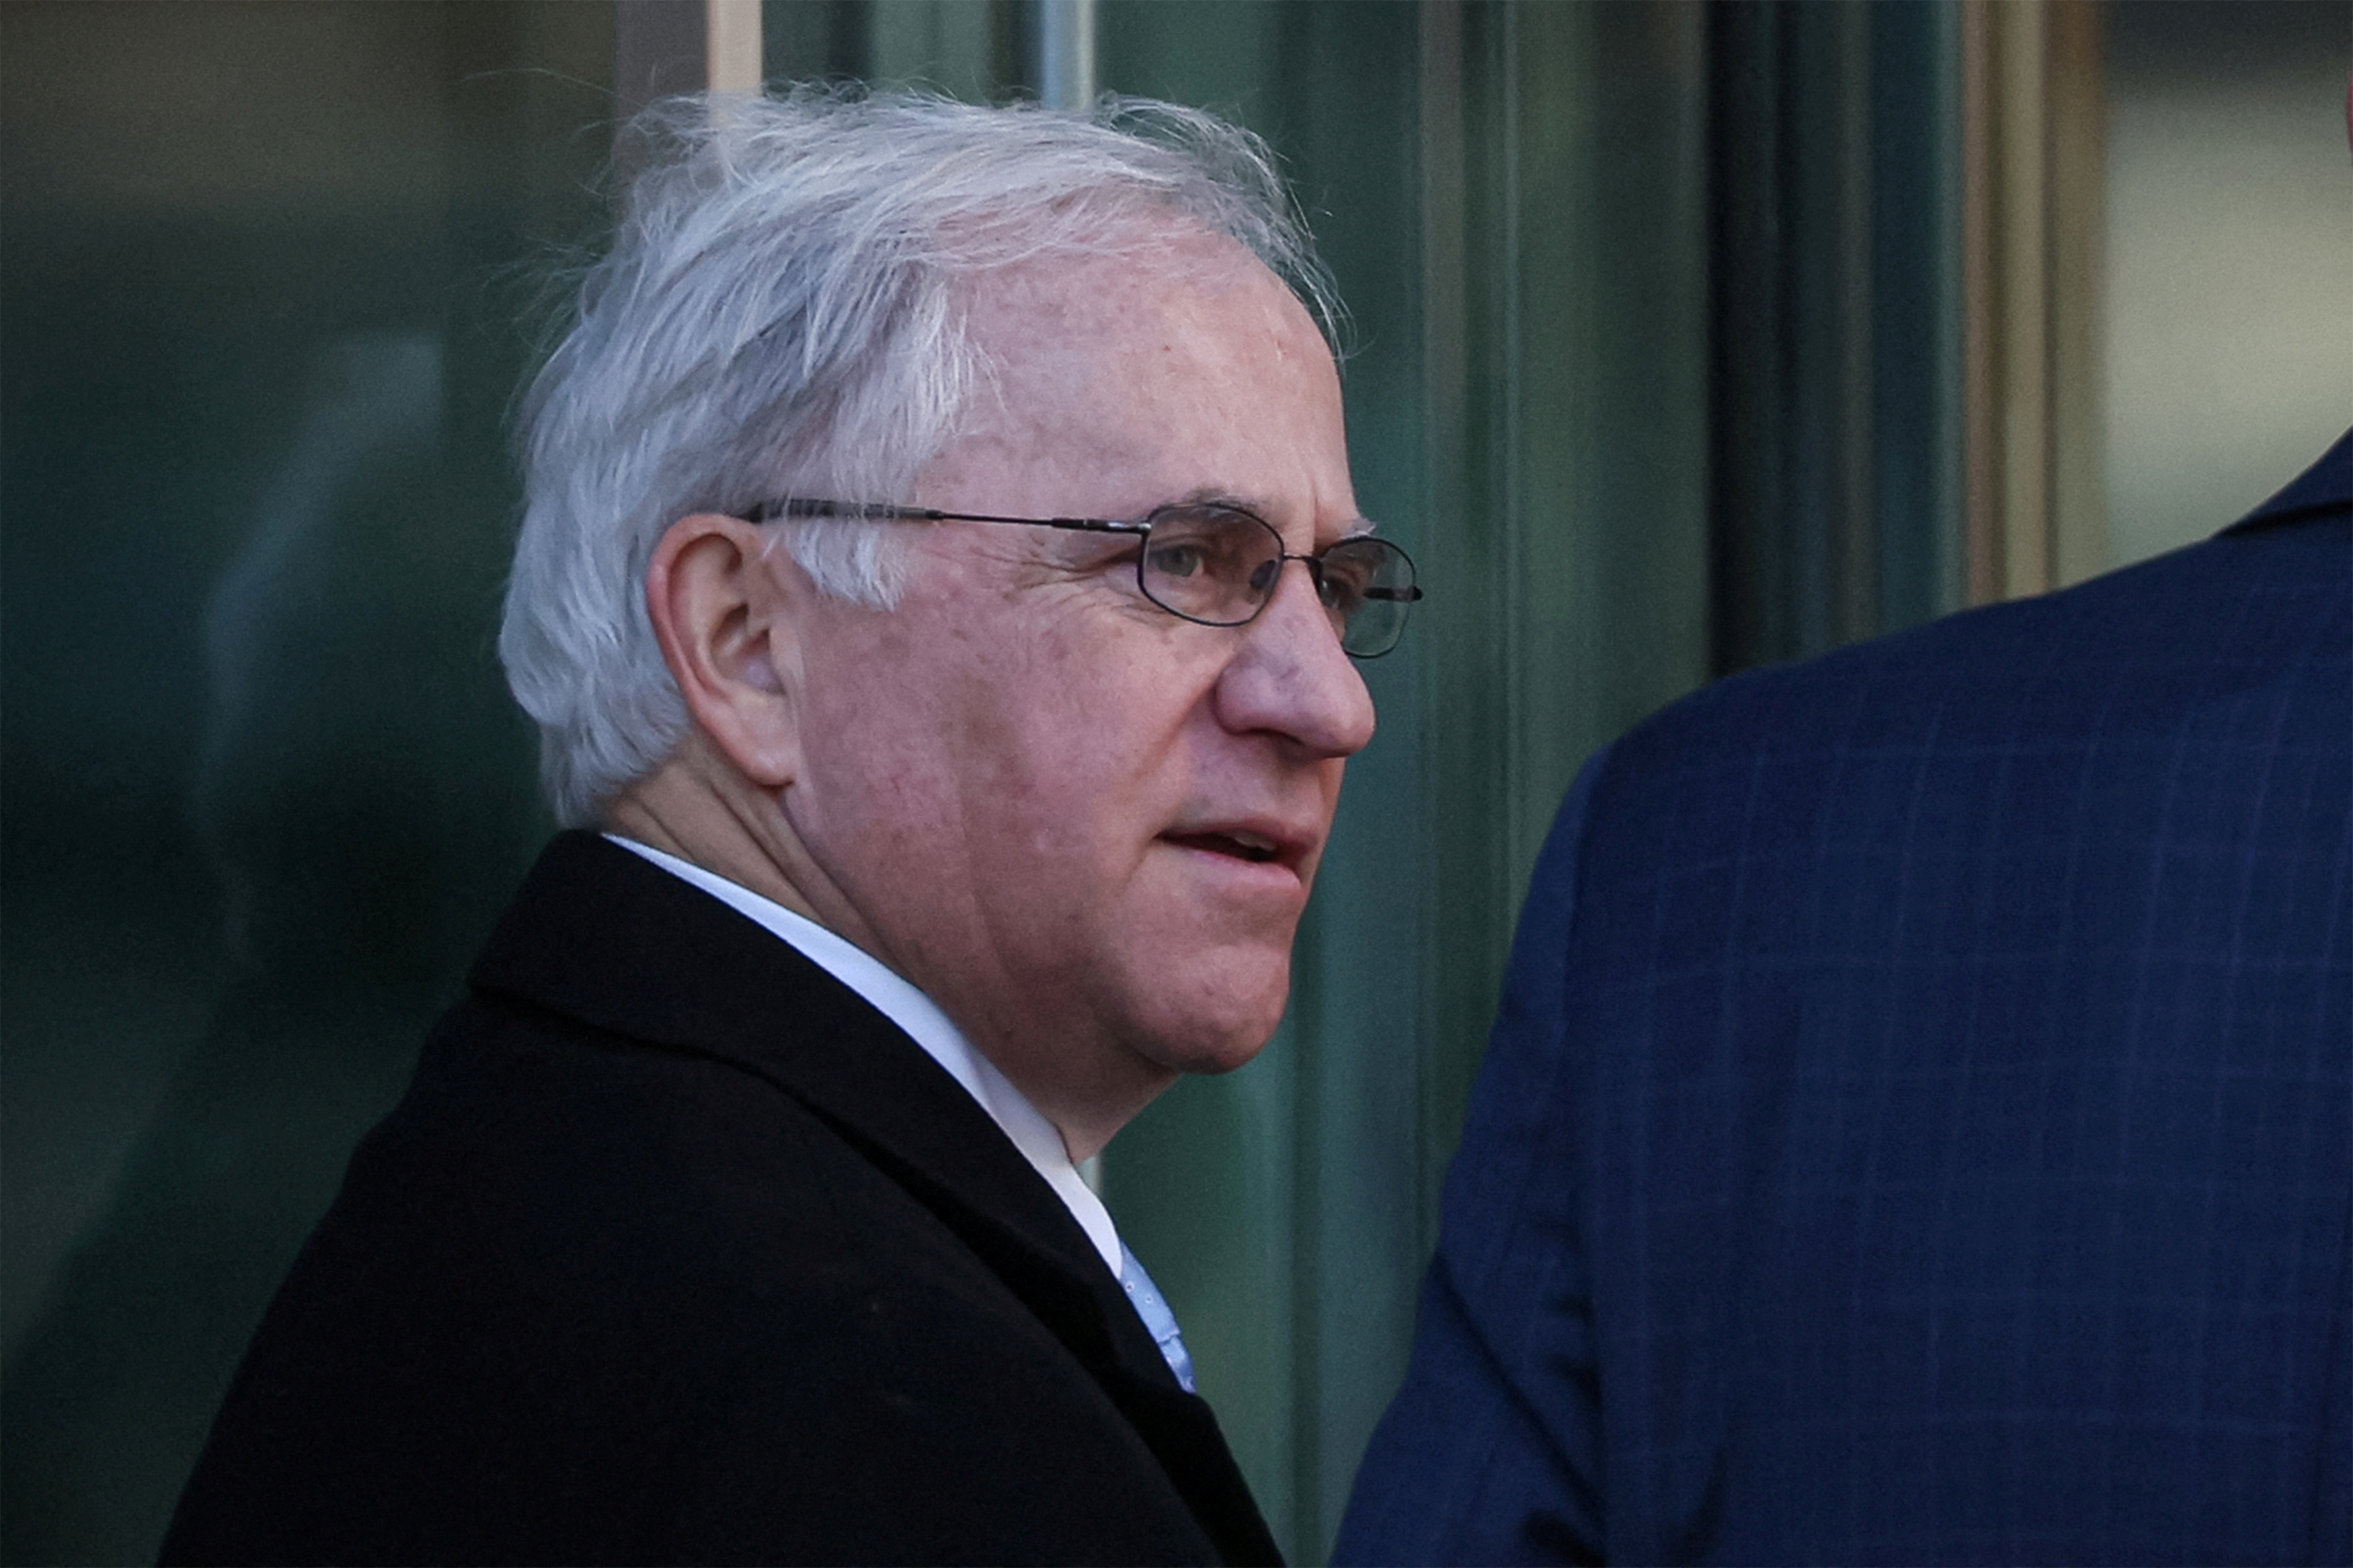 Former U.S. Congressman Stephen Buyer arrives for his insider trading trial in New York